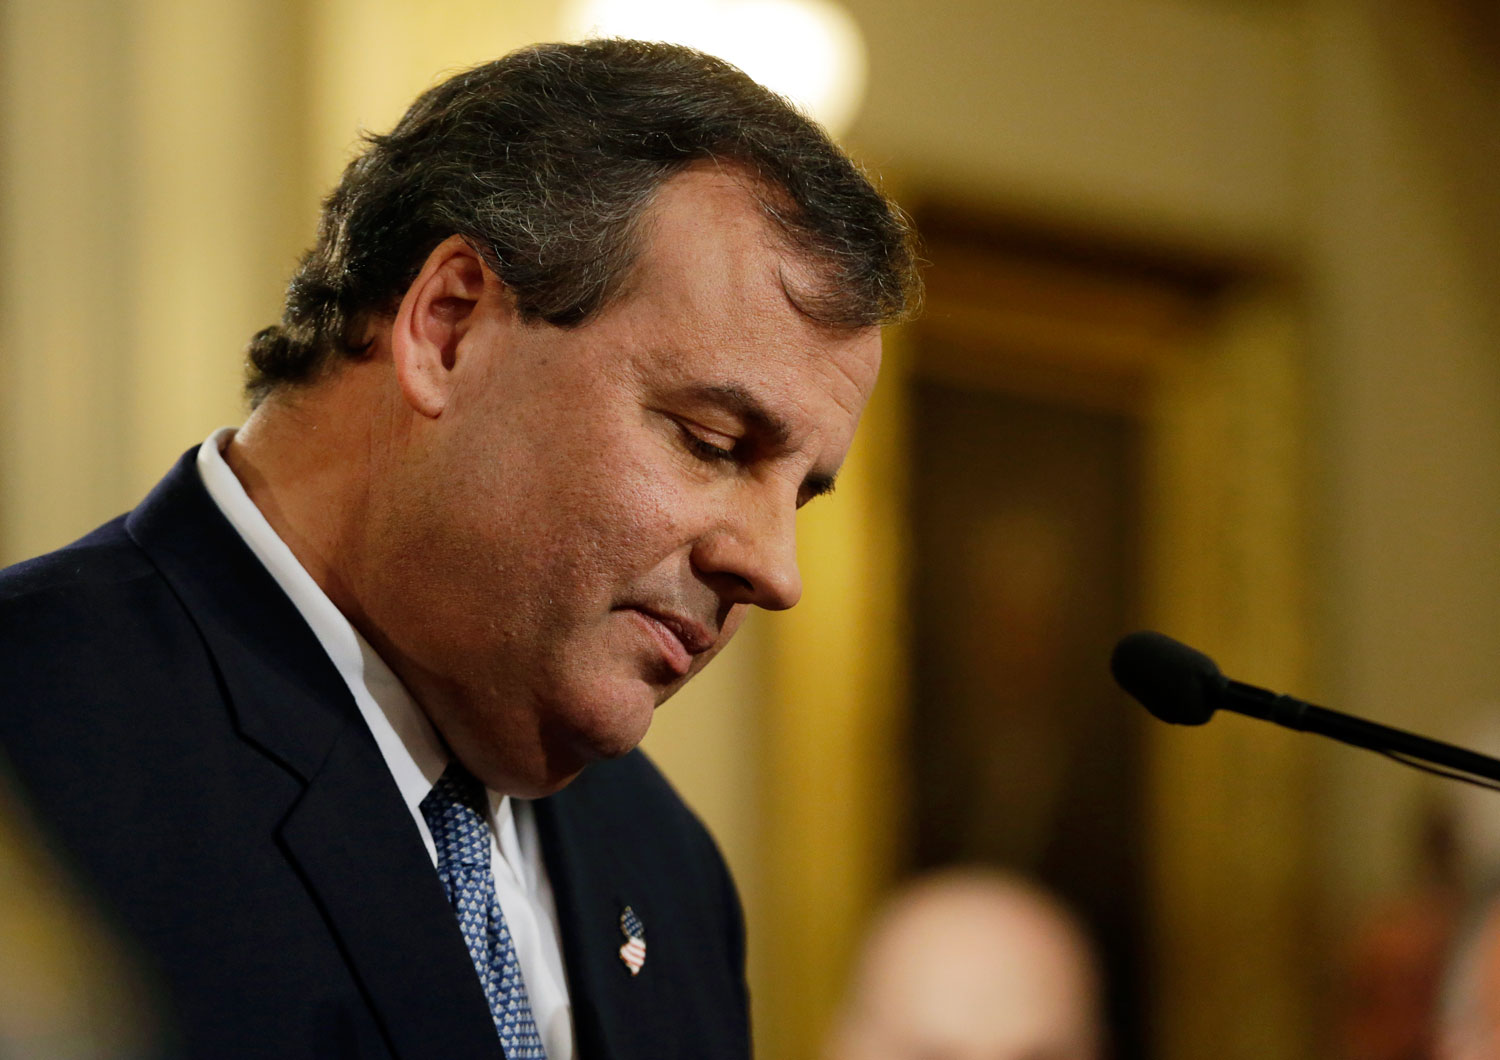 Christie’s Jam Is Also the GOP’s